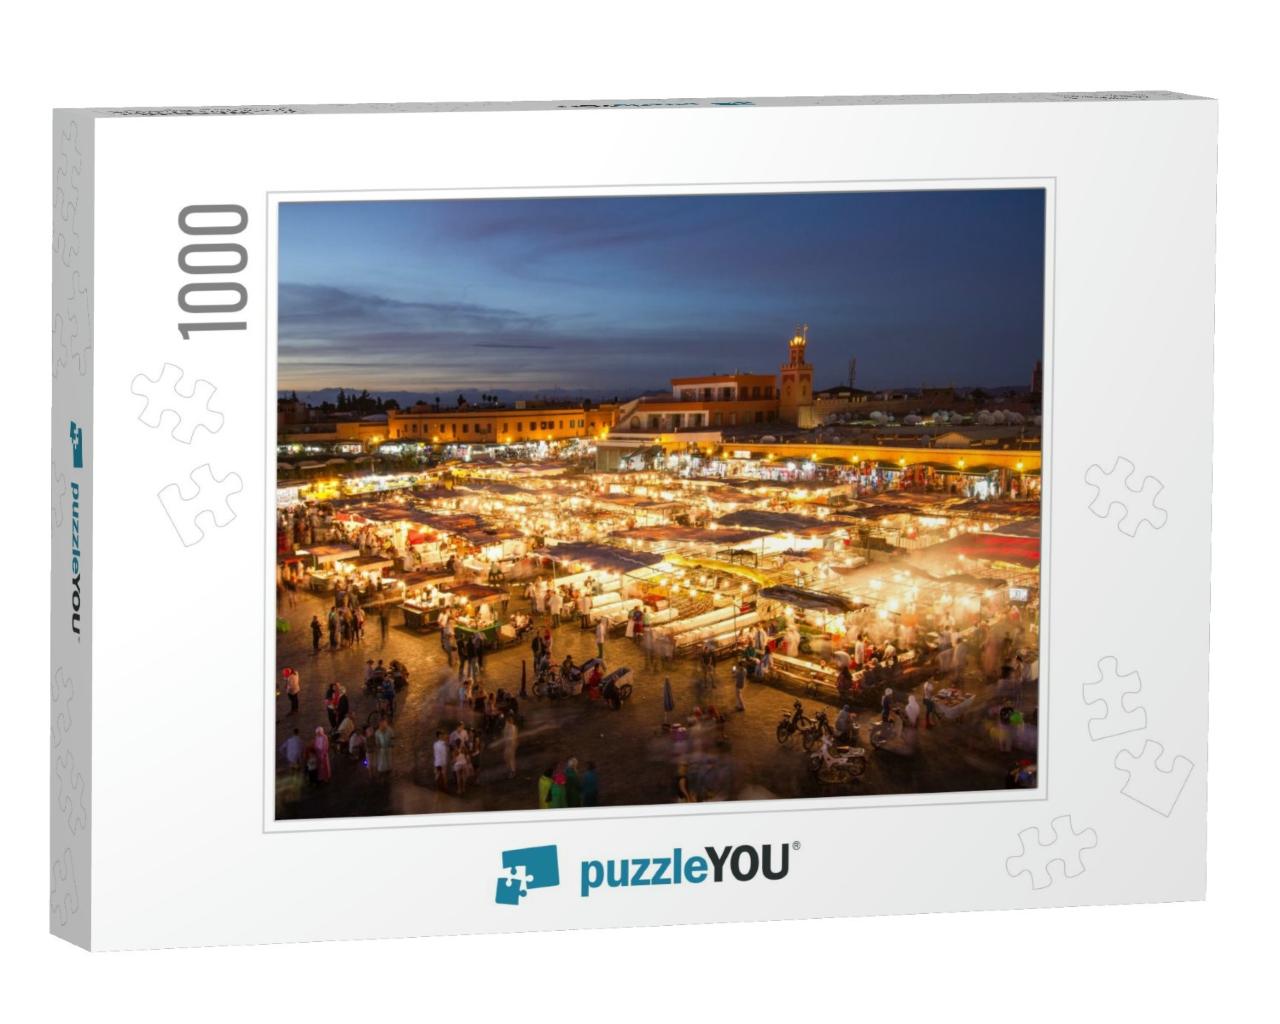 Jamaa El Fna Market Square At Dusk, Marrakesh, Morocco, N... Jigsaw Puzzle with 1000 pieces